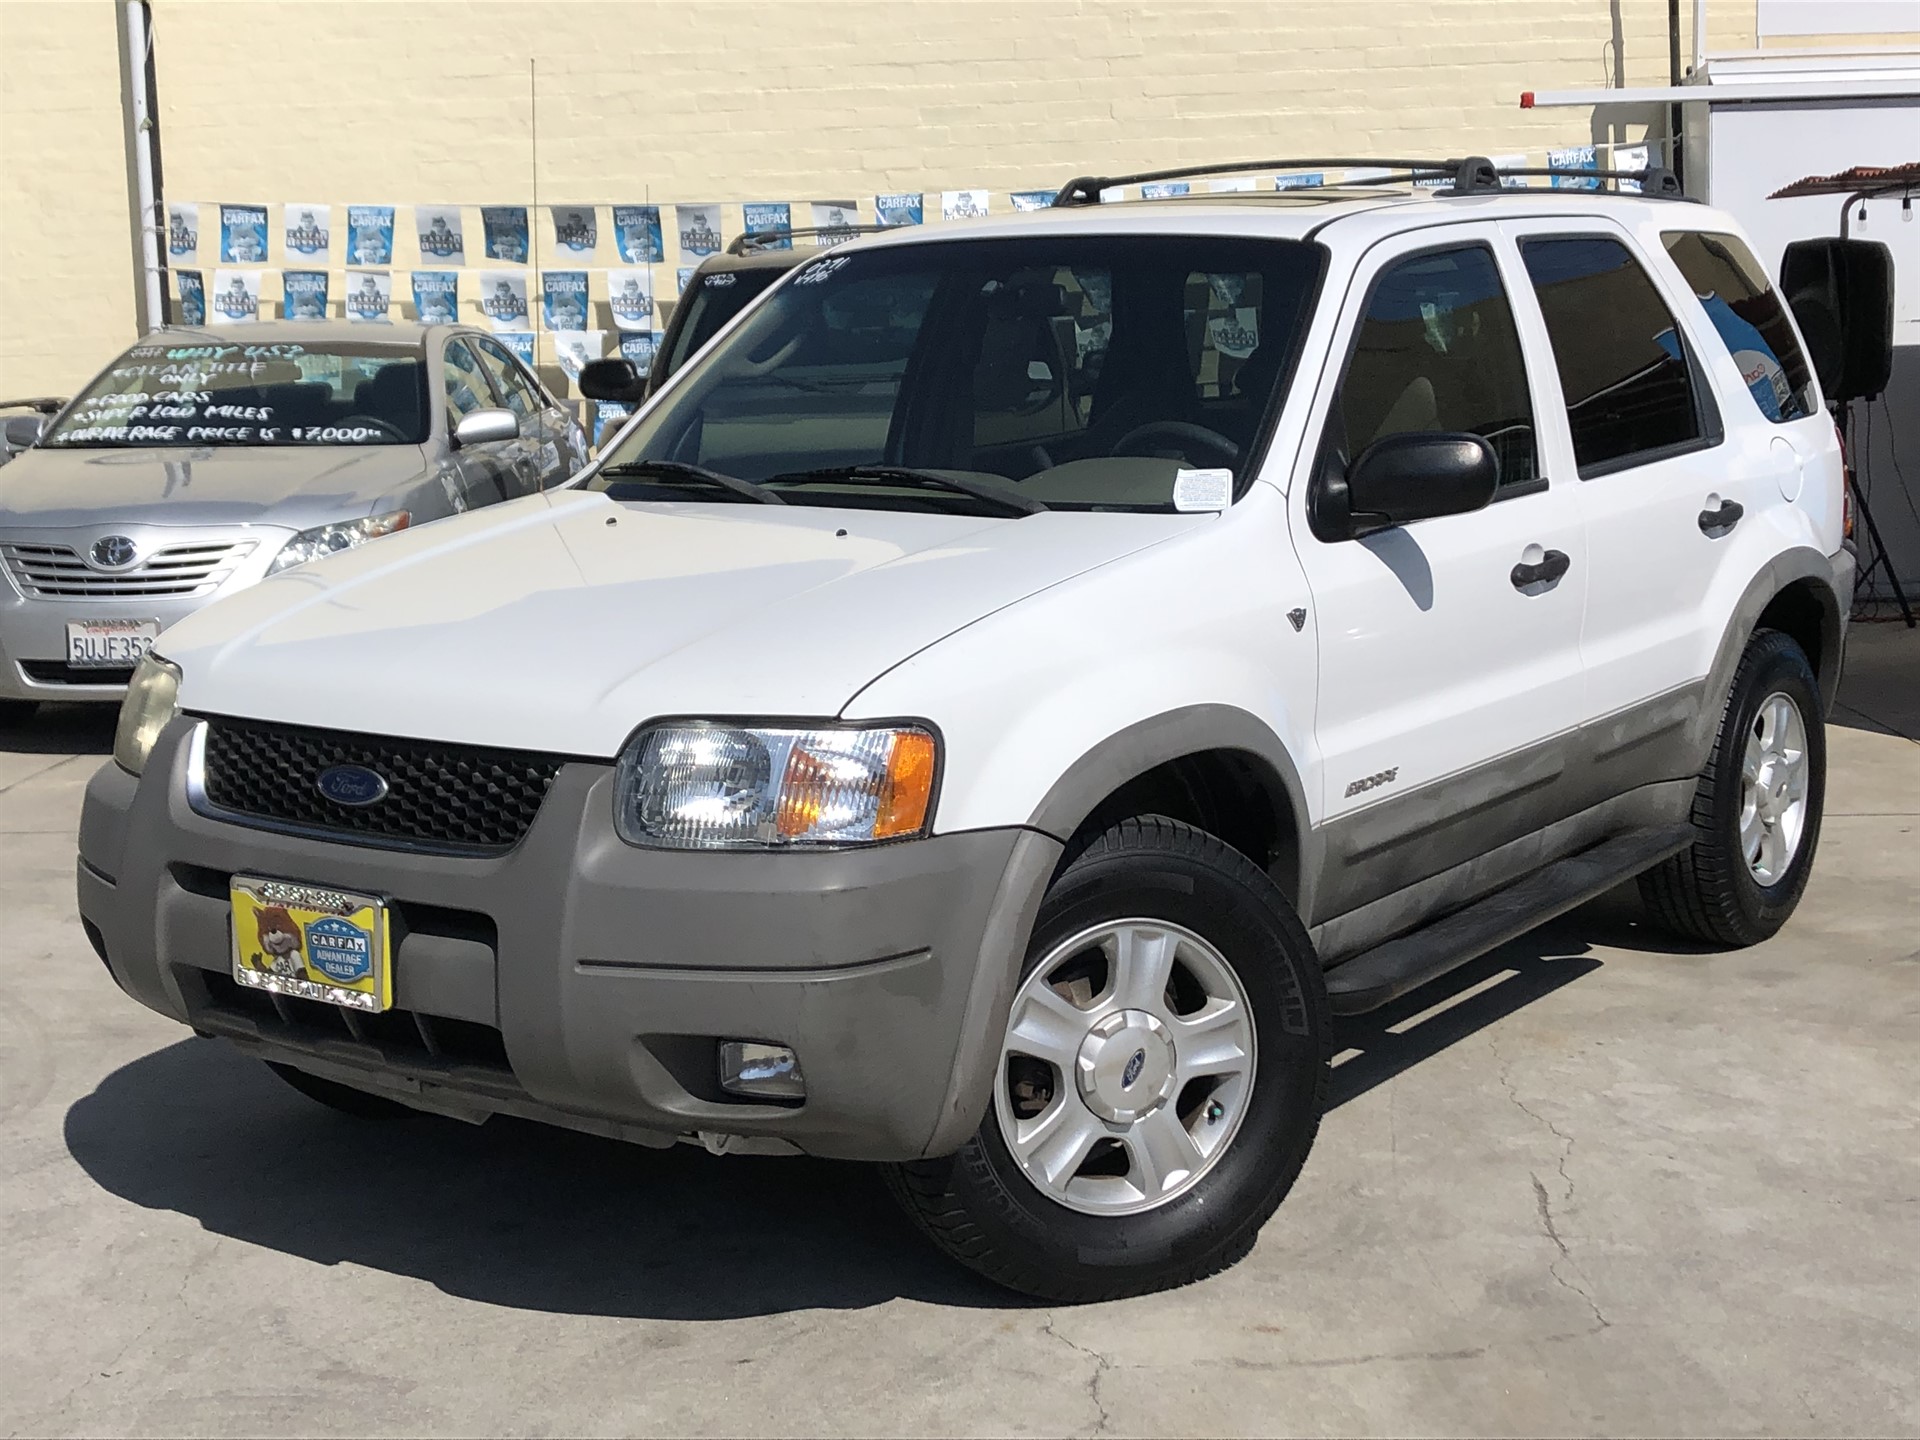 2001 Ford Escape XLT - Low Miles! Leather! Sunroof!